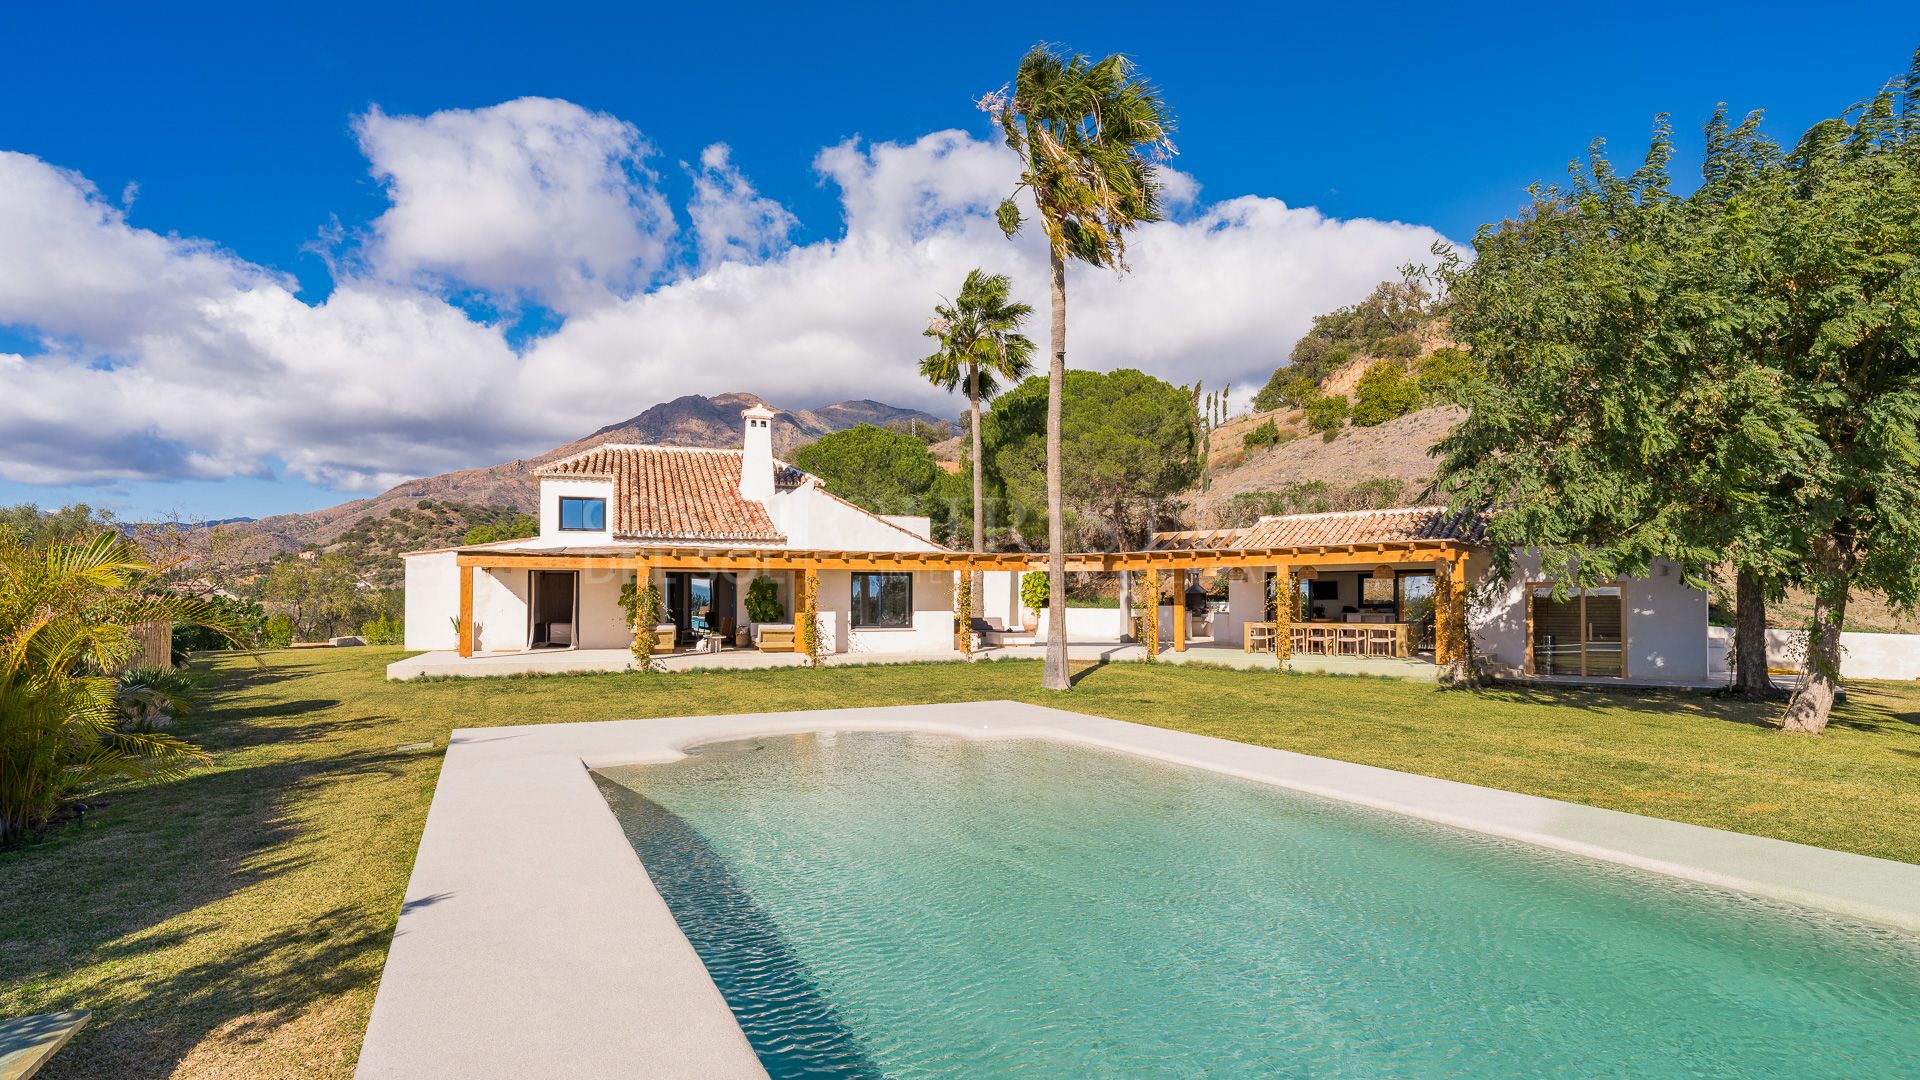 Andalusian-Nordic villa with panoramic views of Estepona Bay | Christie’s International Real Estate